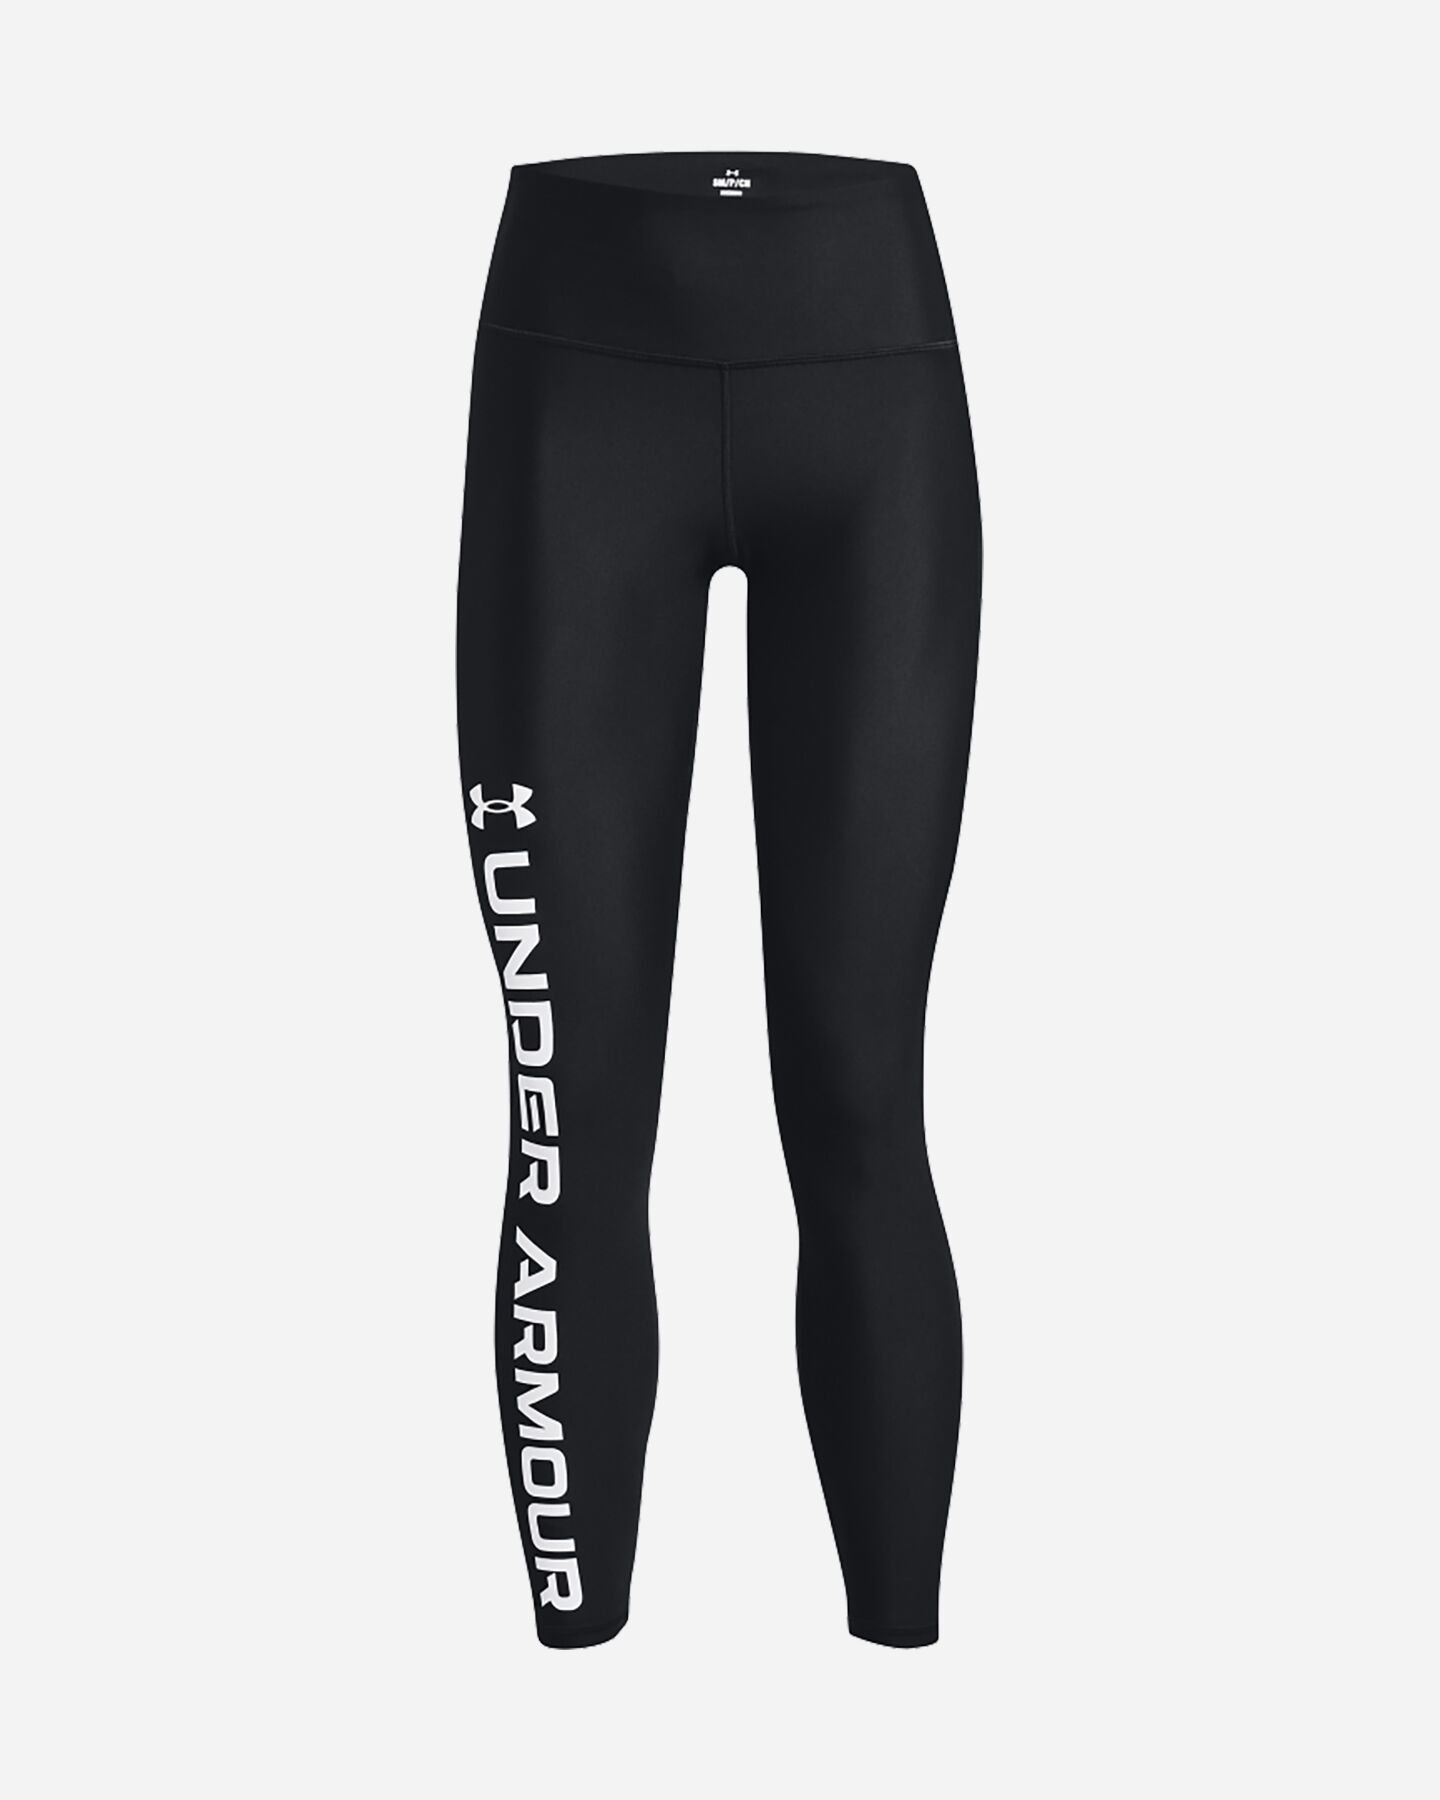  Leggings UNDER ARMOUR BRANDED W S5459646|0001|XS scatto 0